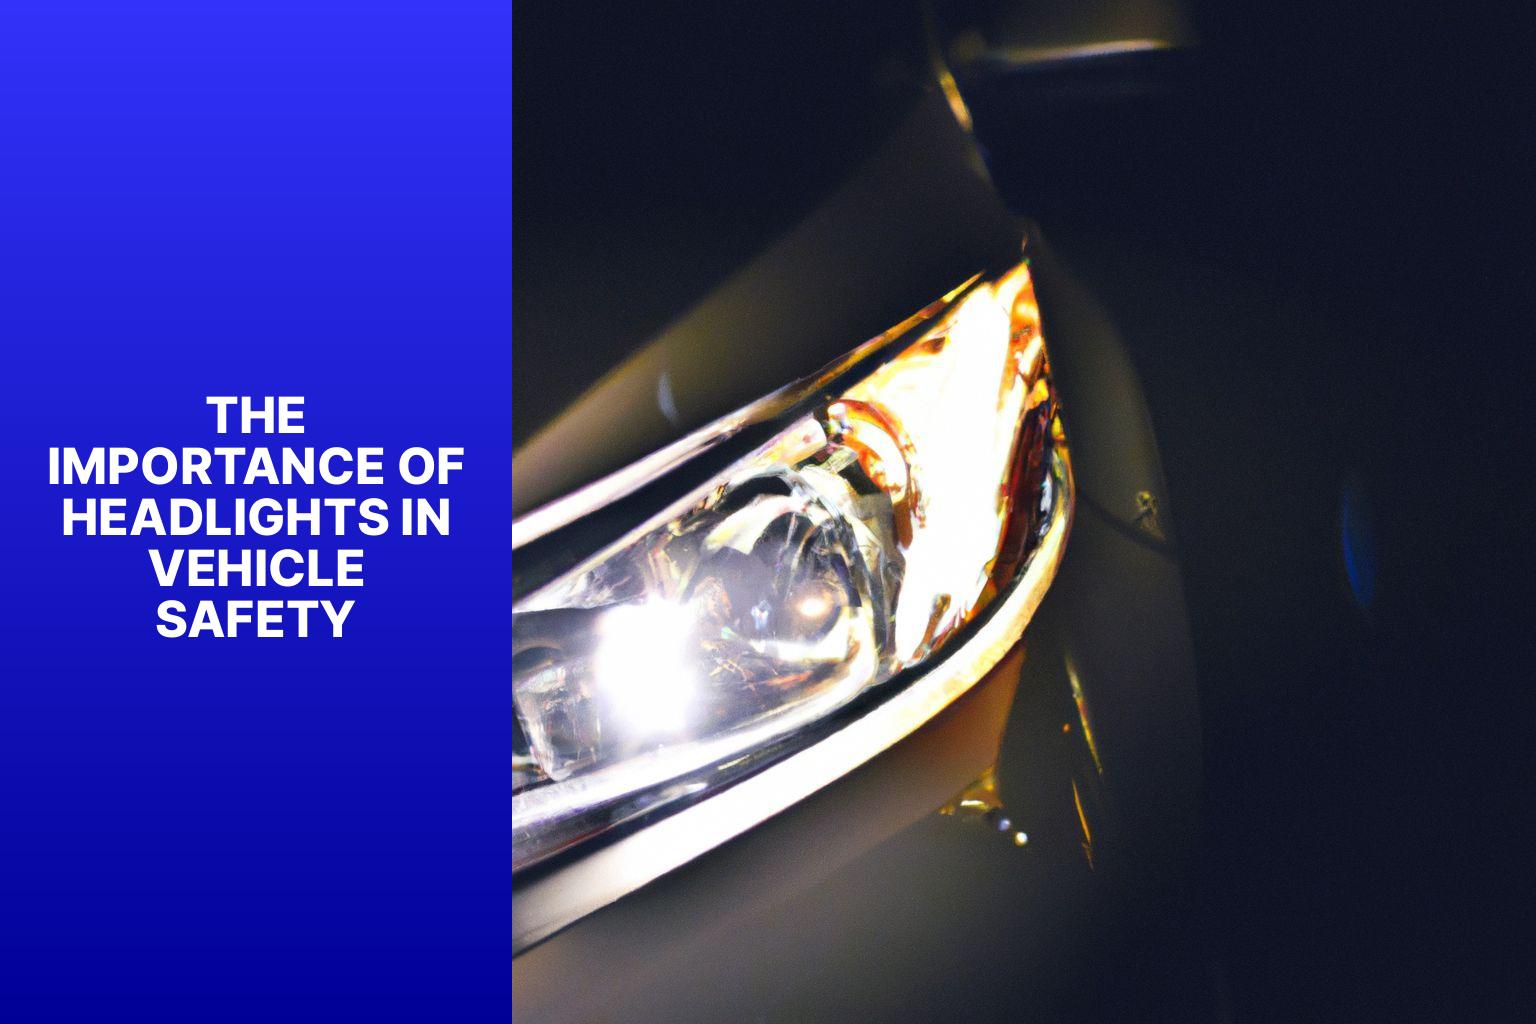 The Importance of Headlights in Vehicle Safety - Illuminate the Road: A Close Look at 2013 Nissan Altima Headlights 